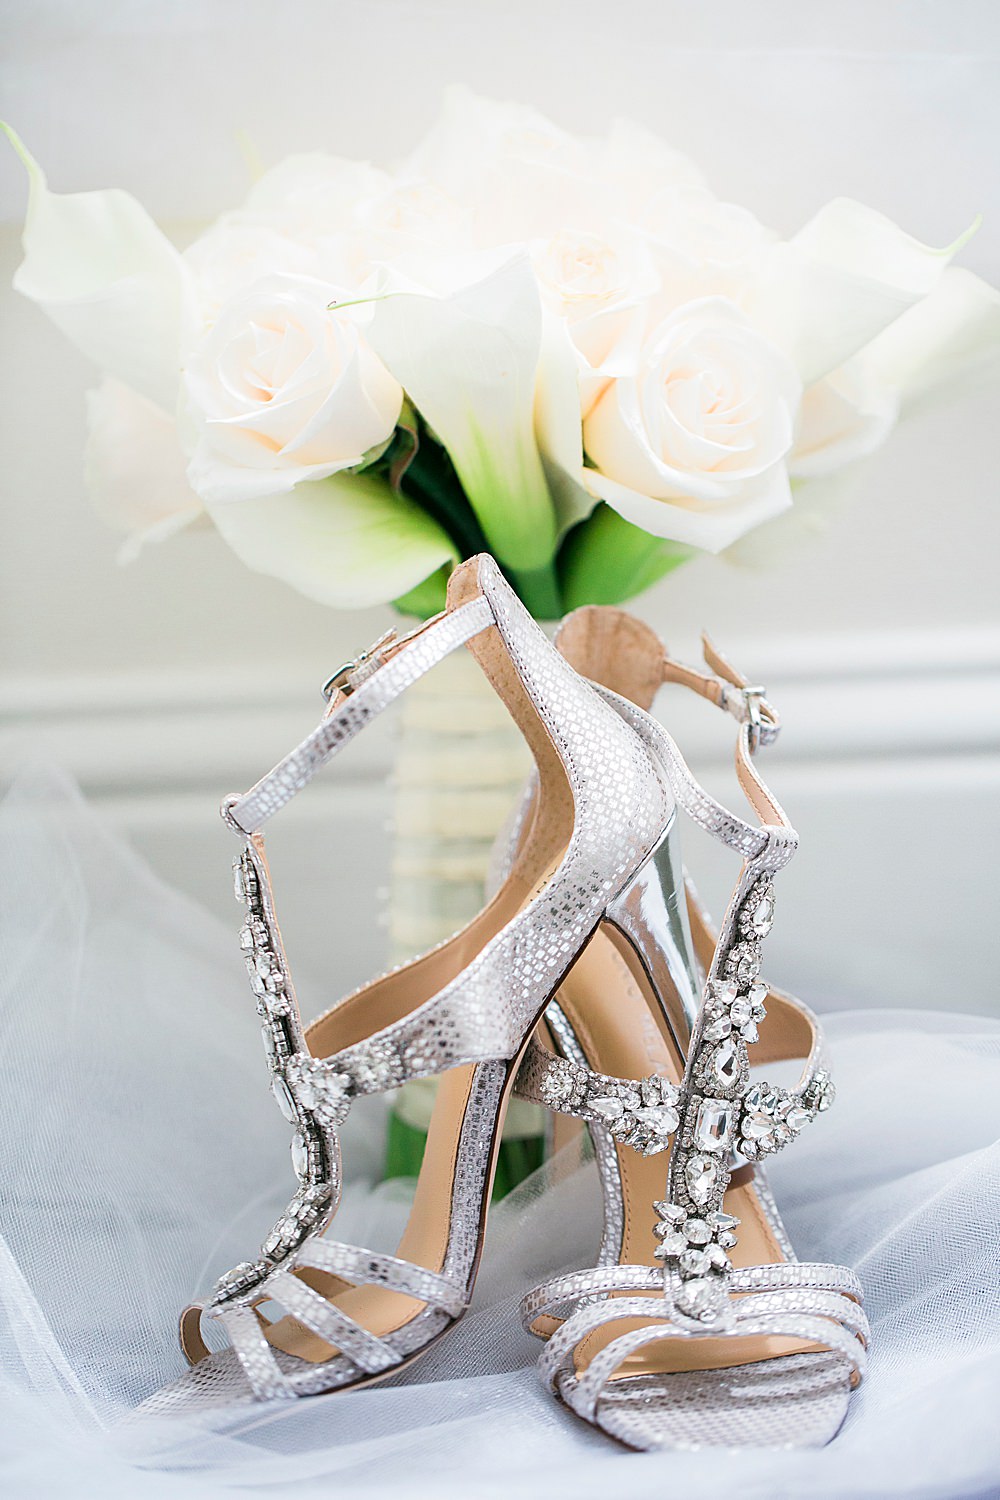 Detail photo of silver jewled heels with white rose bouquet